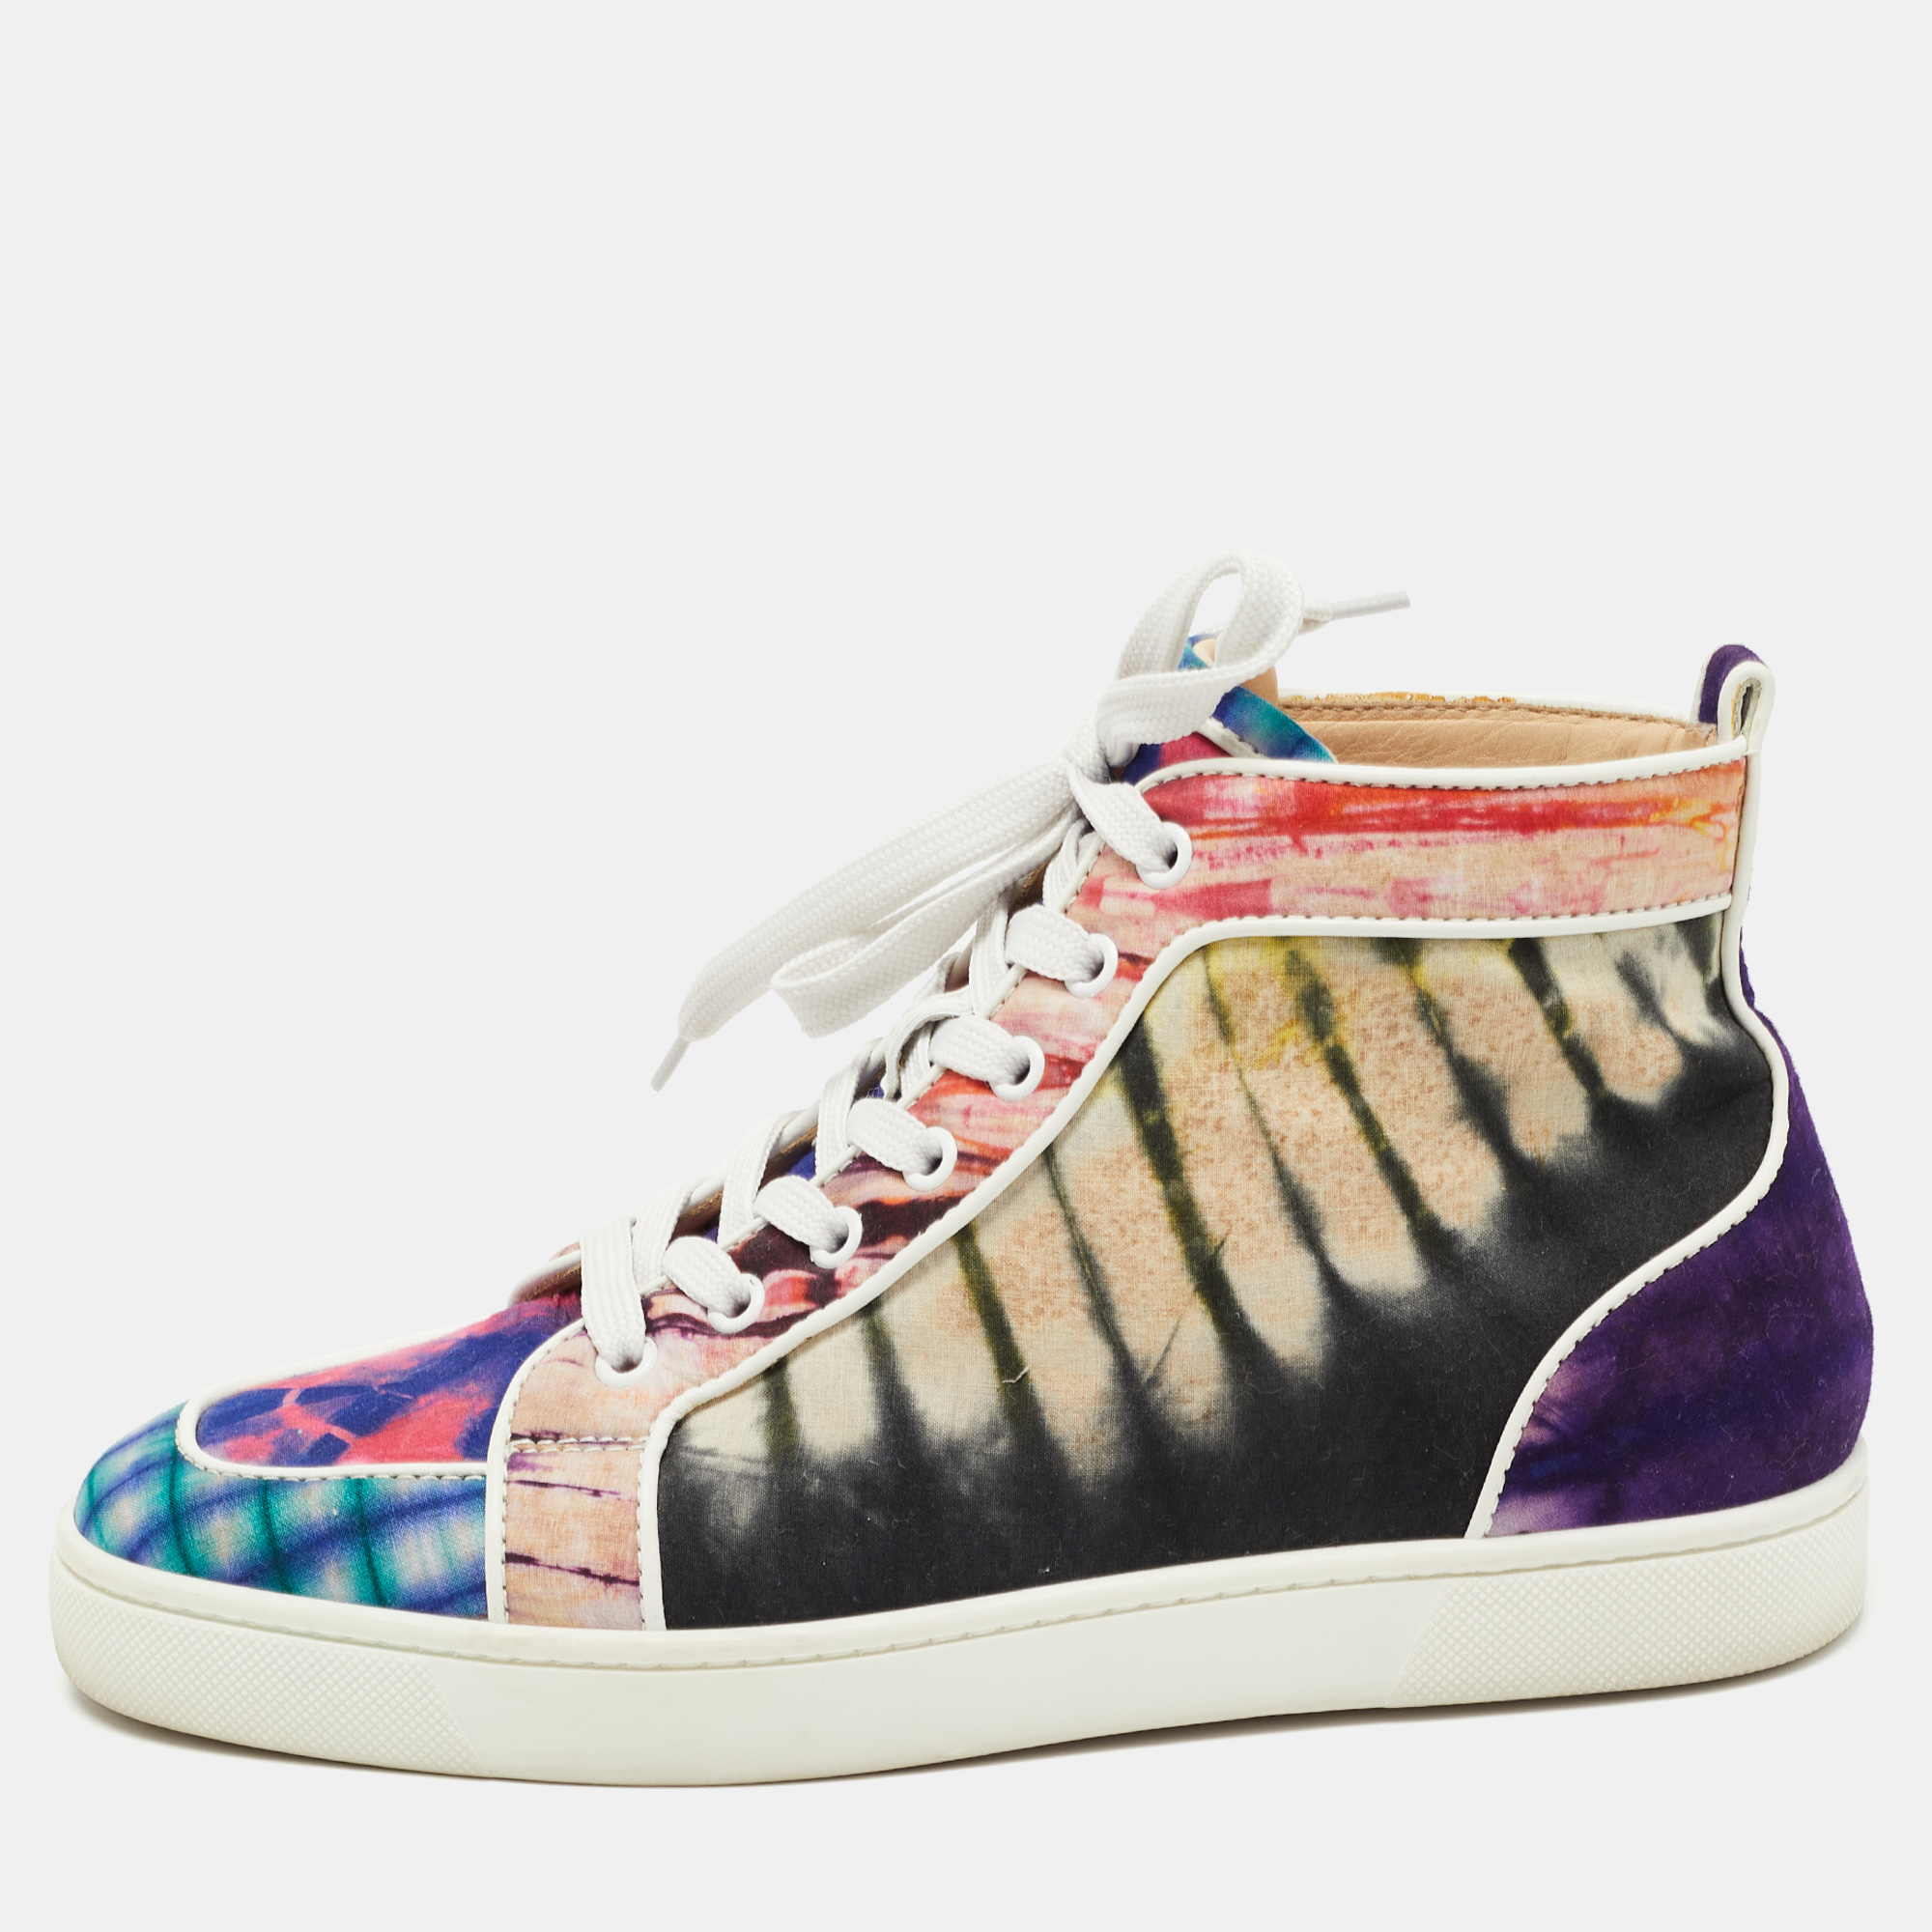 Pre-owned Christian Louboutin Multicolor Fabric Tie Dye High Top Trainers Size 39.5